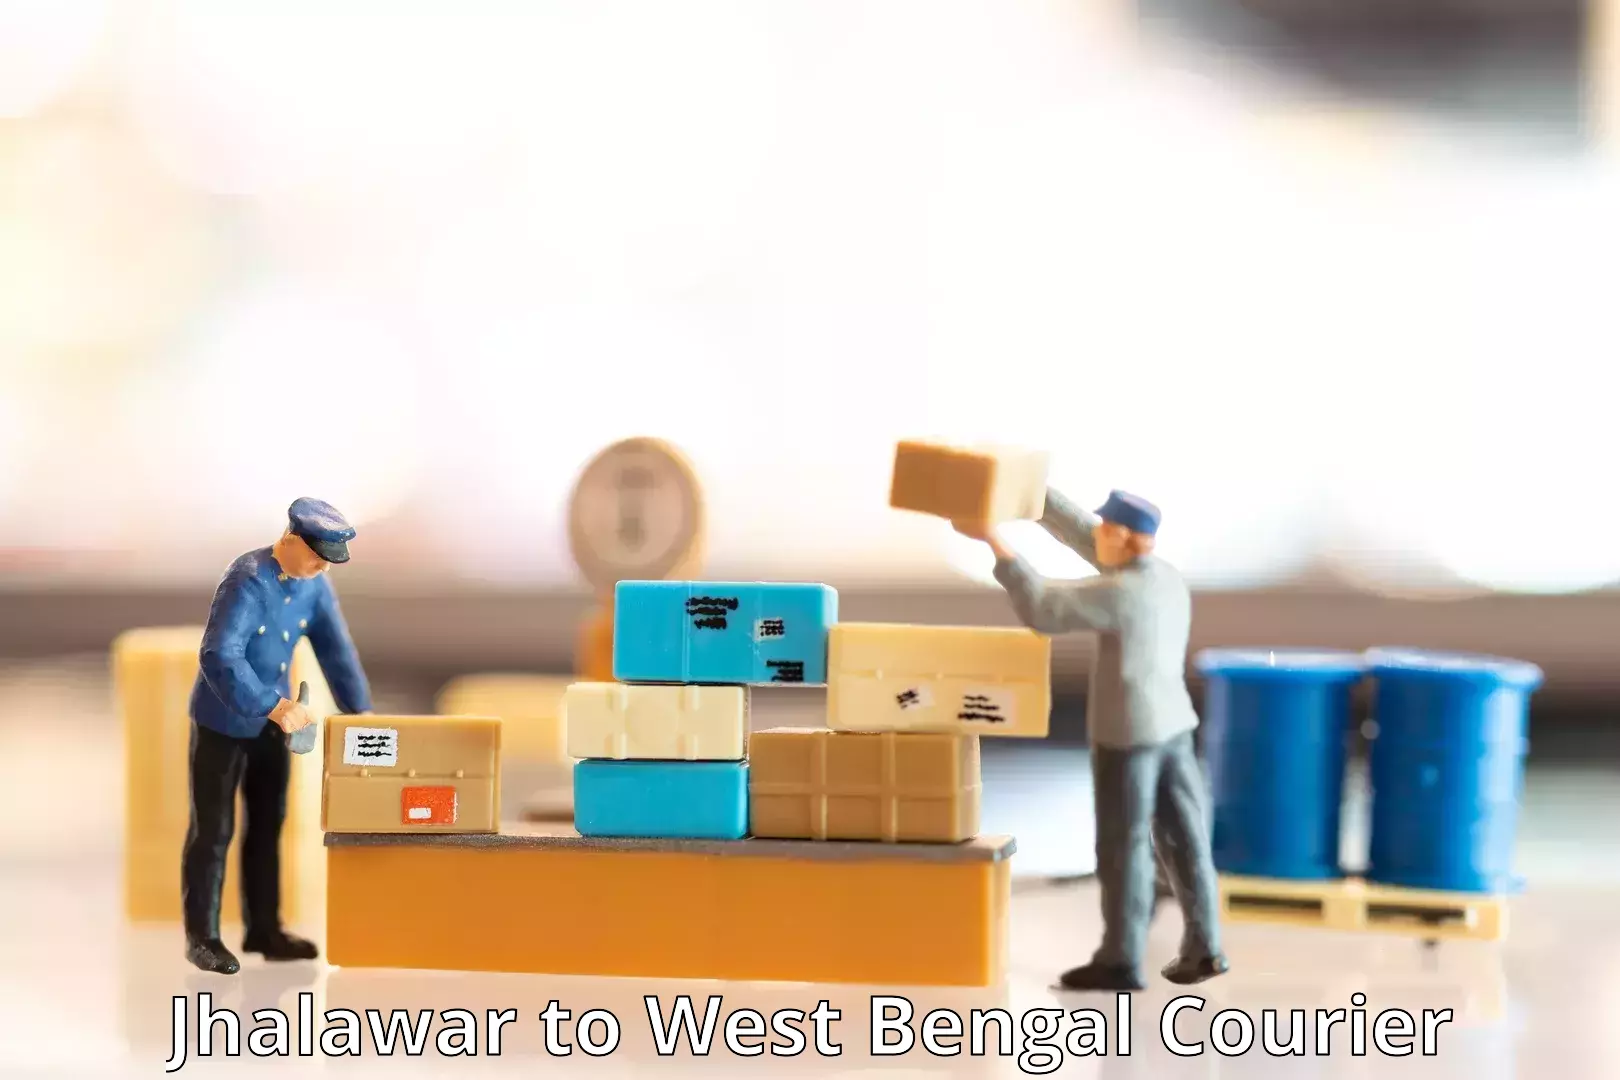 State-of-the-art courier technology Jhalawar to West Bengal